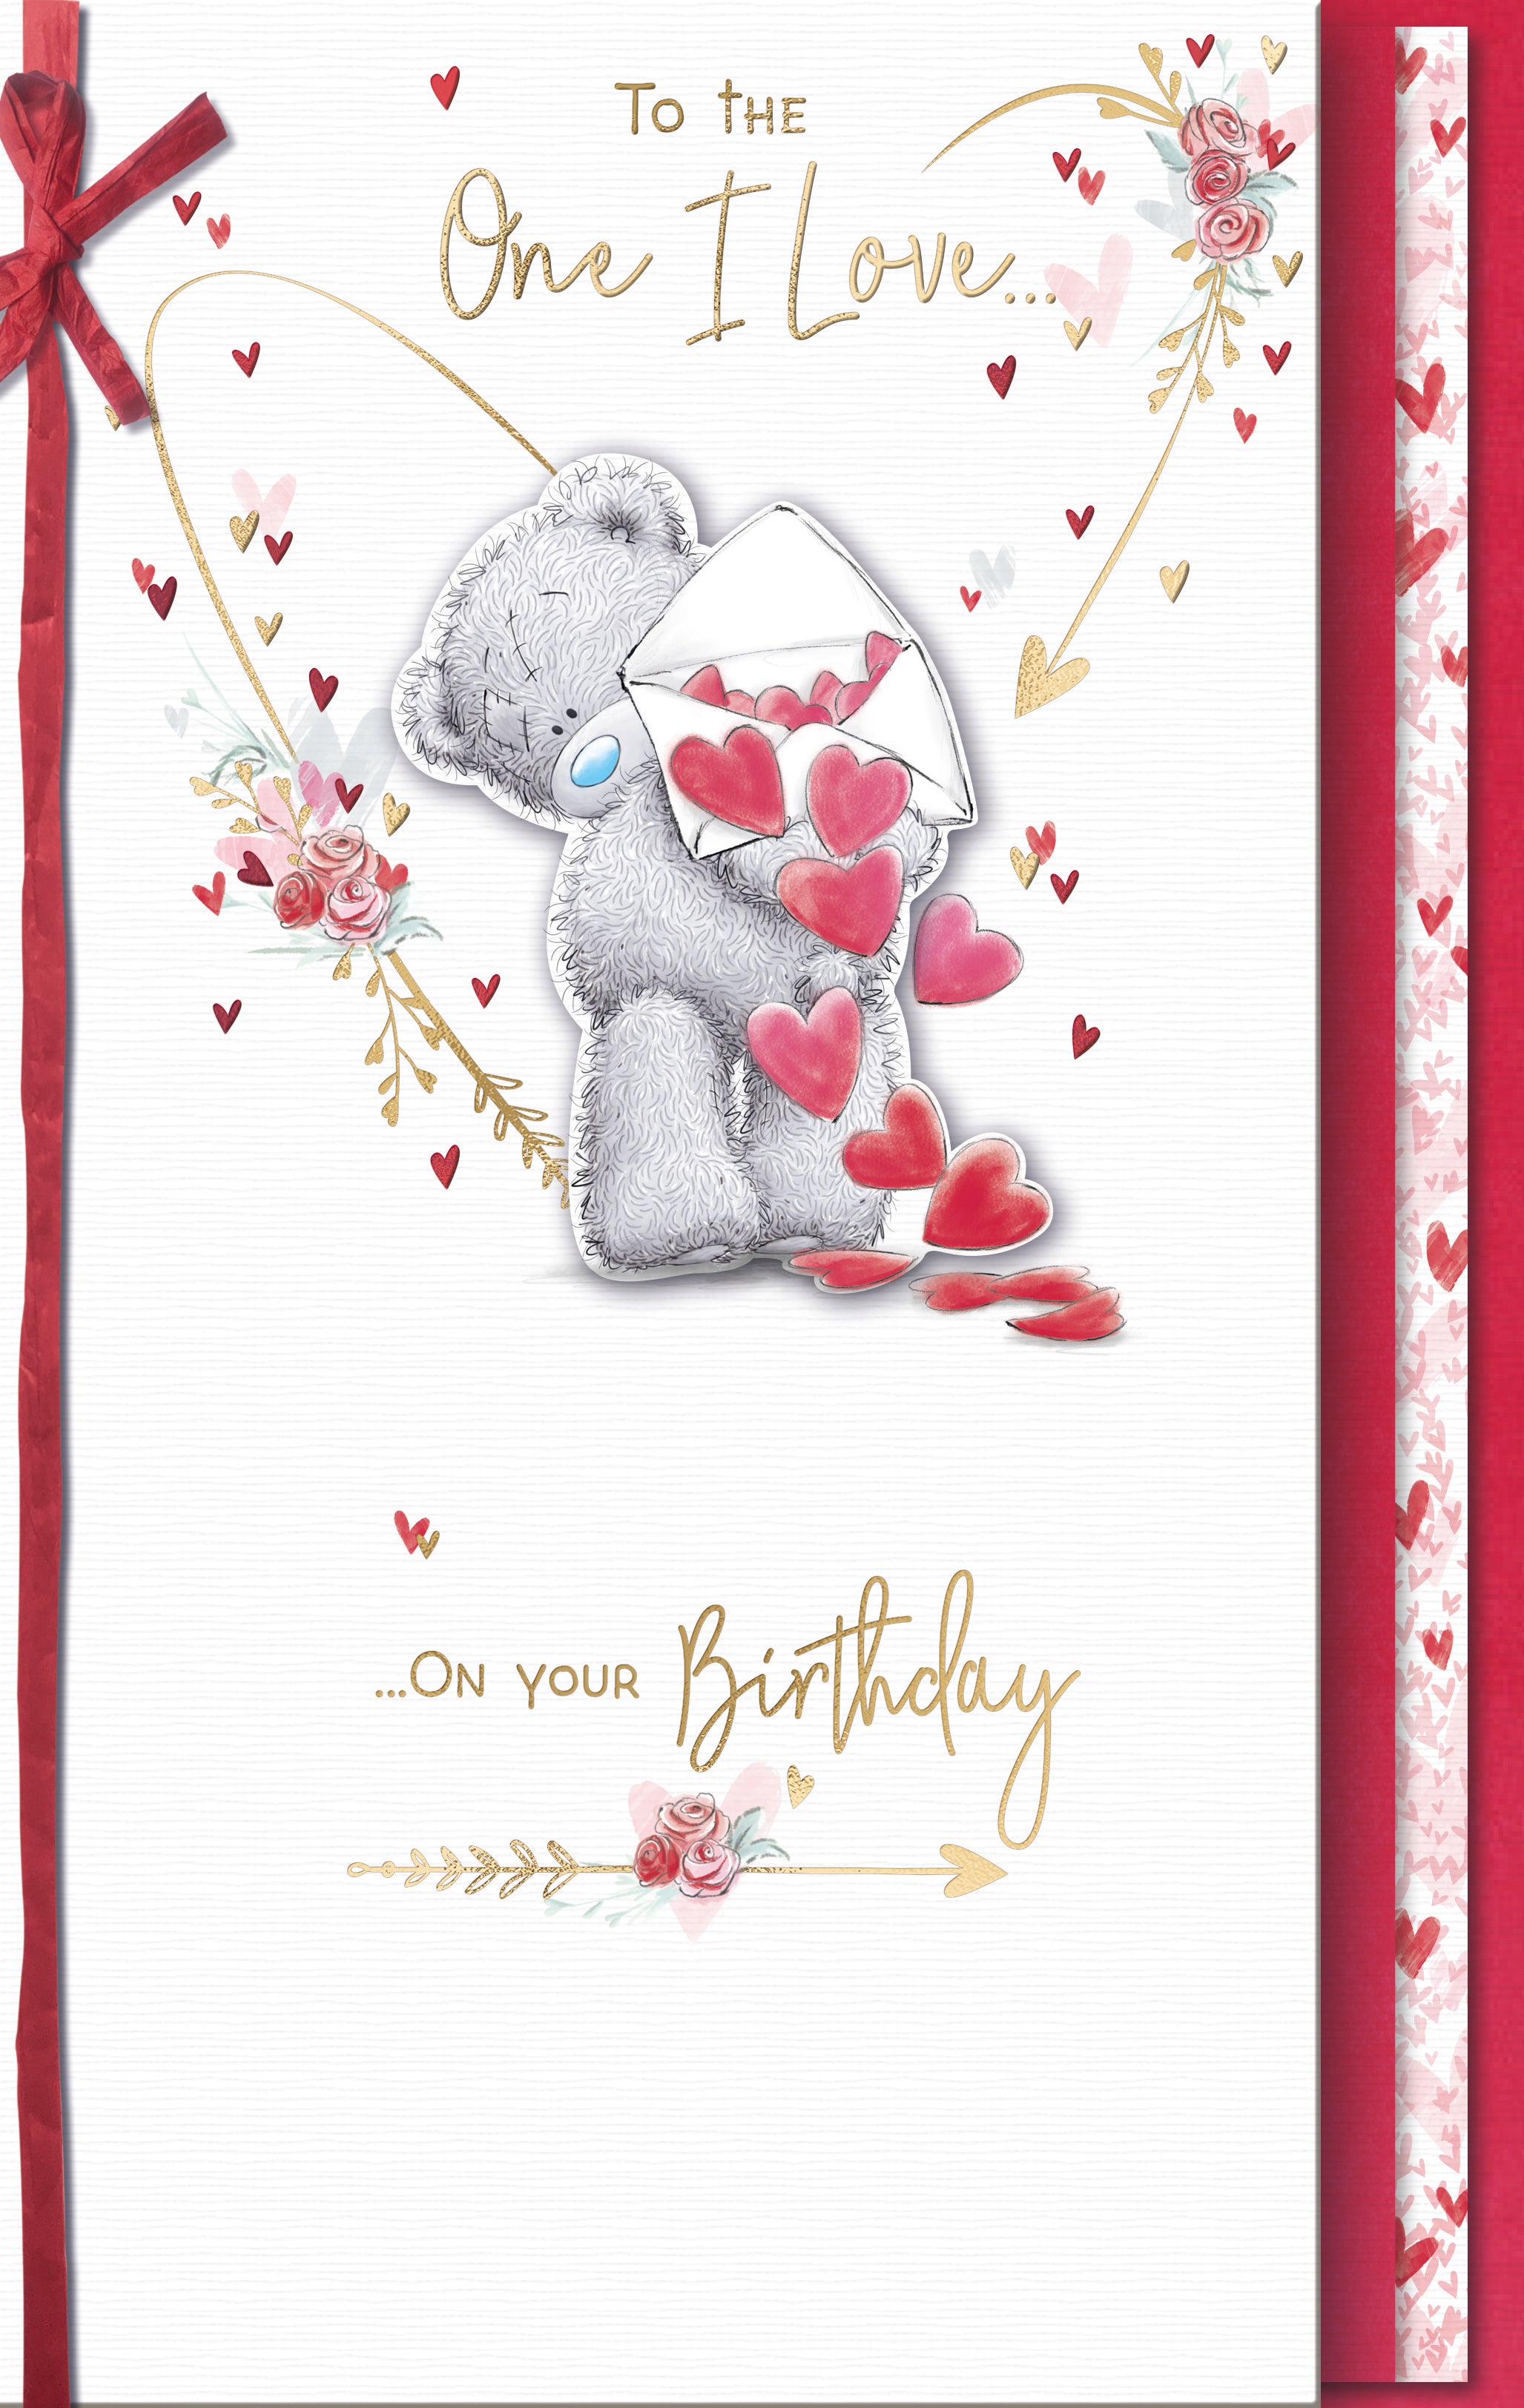 To the One I Love Bear And Envelope Of Hearts Birthday Card